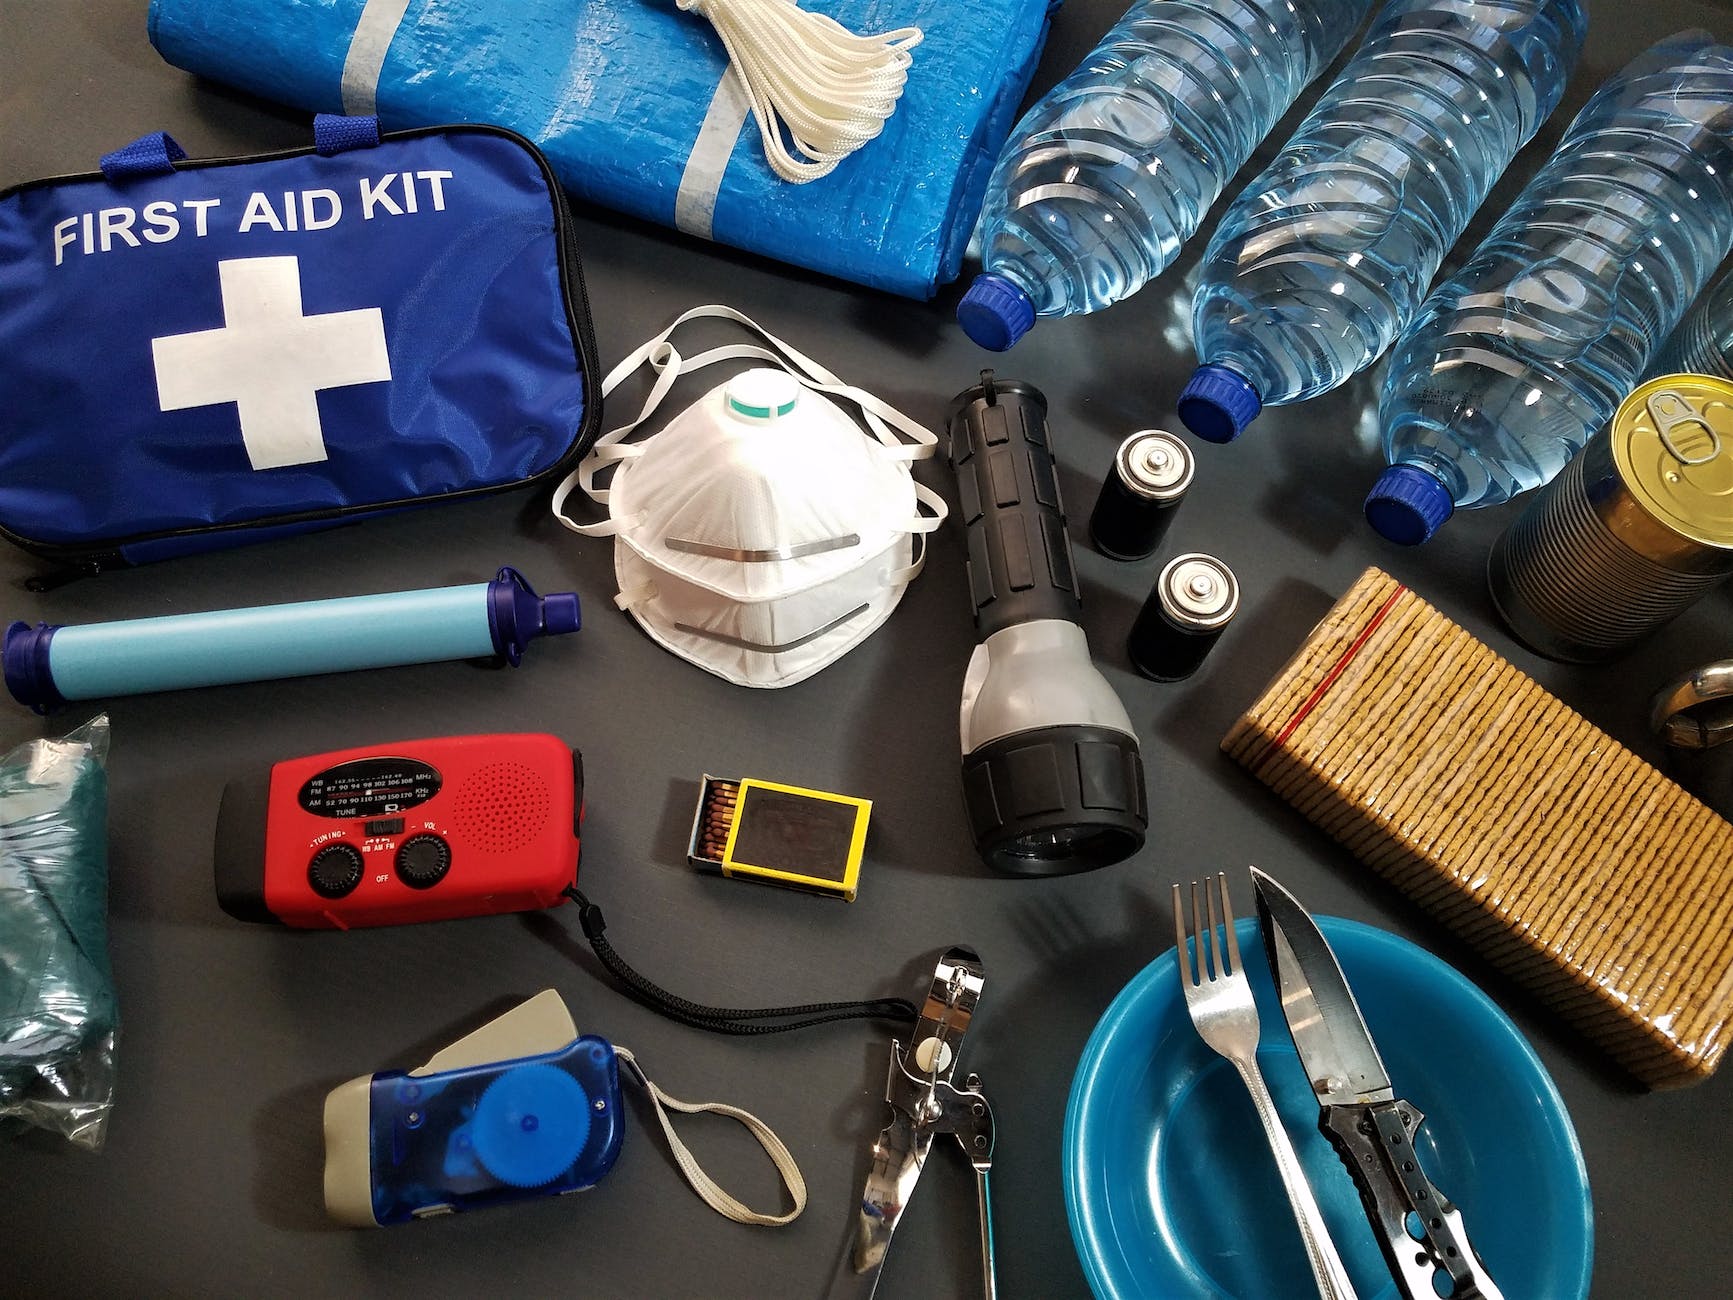 Emergency Medical Kit: First Aid - HSE STUDY GUIDE